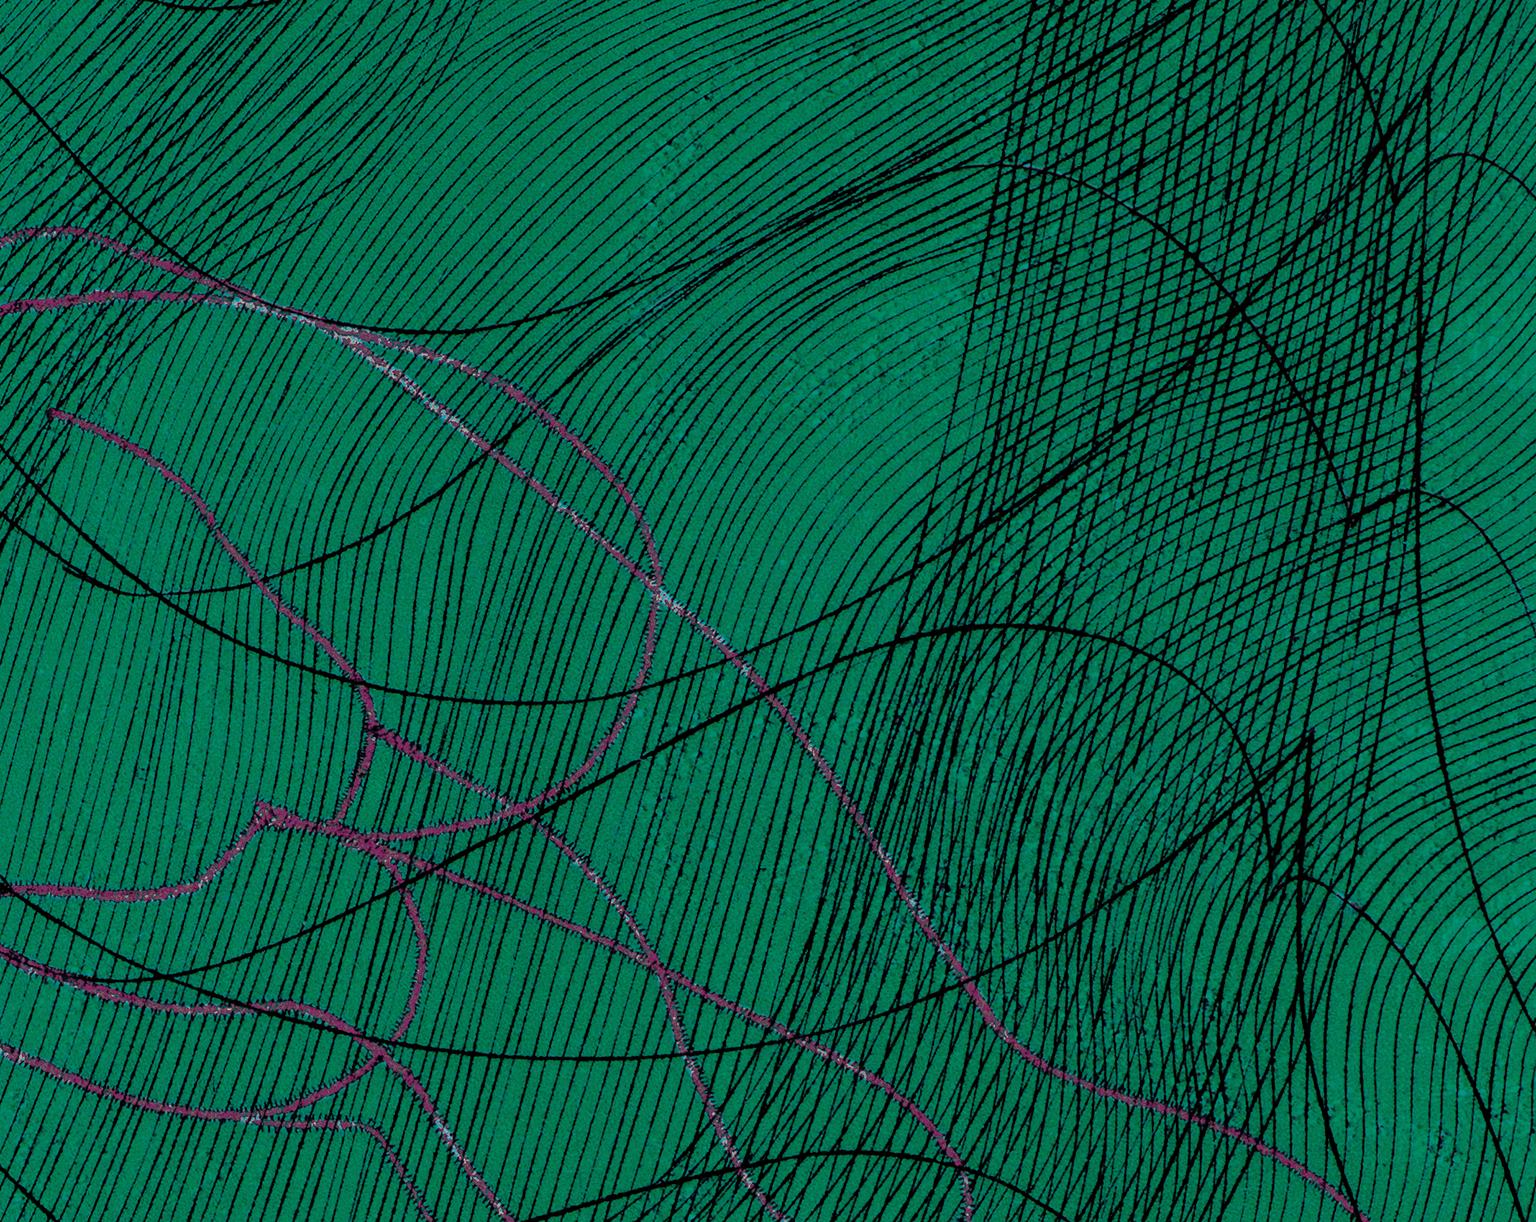 Stanley William Hayter, 'Diptych', color engraving and scorper, 1967, edition 50, Black & Moorhead 314. Signed, titled, dated, and numbered '10/50' in pencil. A superb, richly-inked impression, with fresh, vibrant colors on antique-white wove BFK